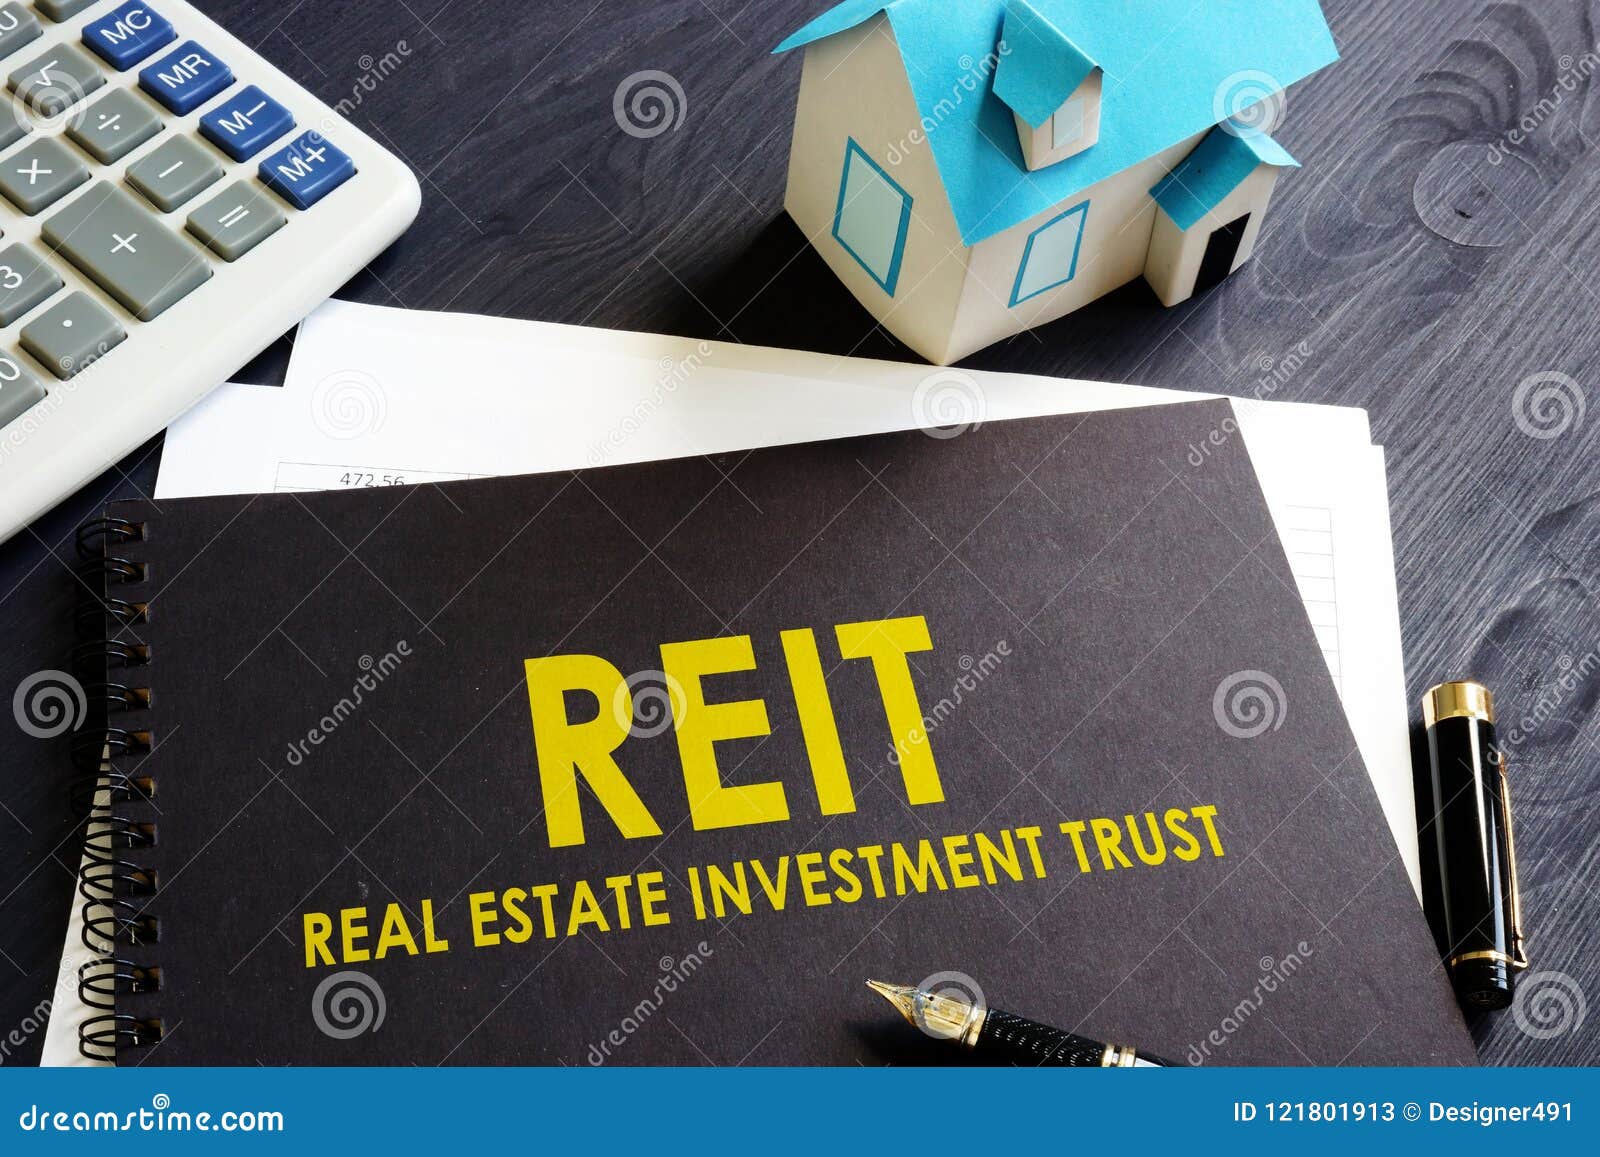 real estate investment trust reit on a desk.